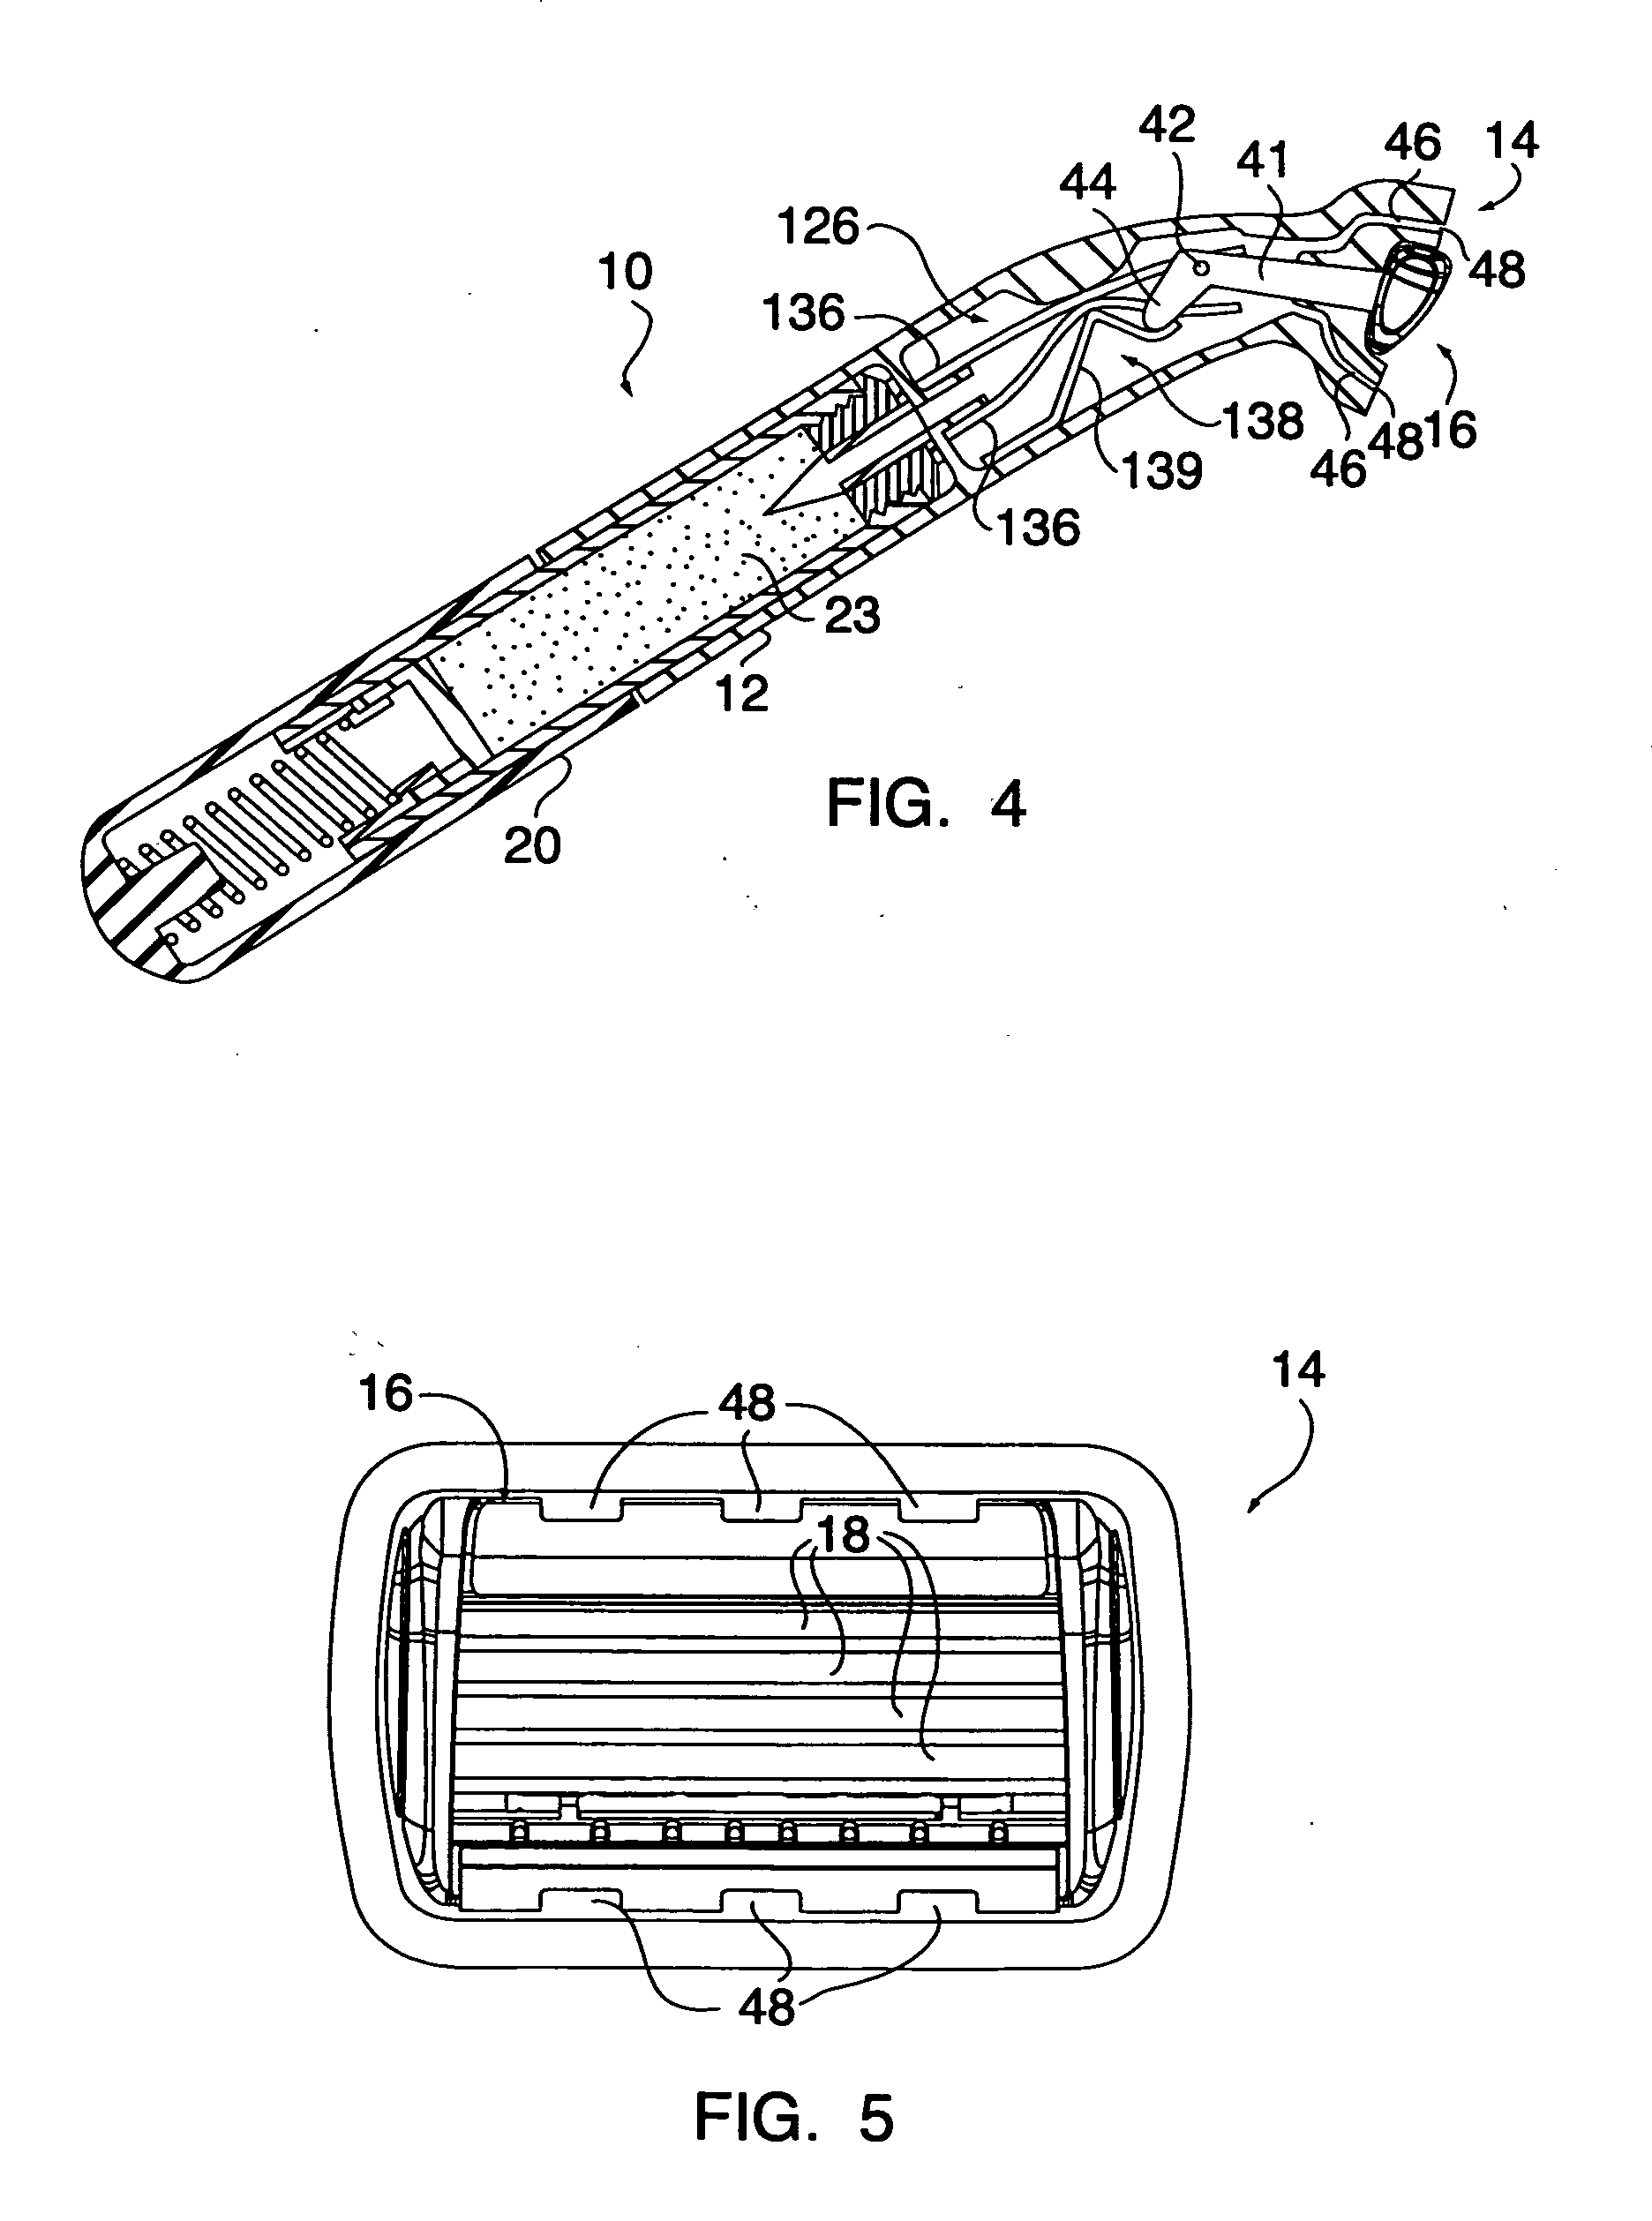 Shaving apparatus with pivot-actuated valve for delivery of shaving aid material